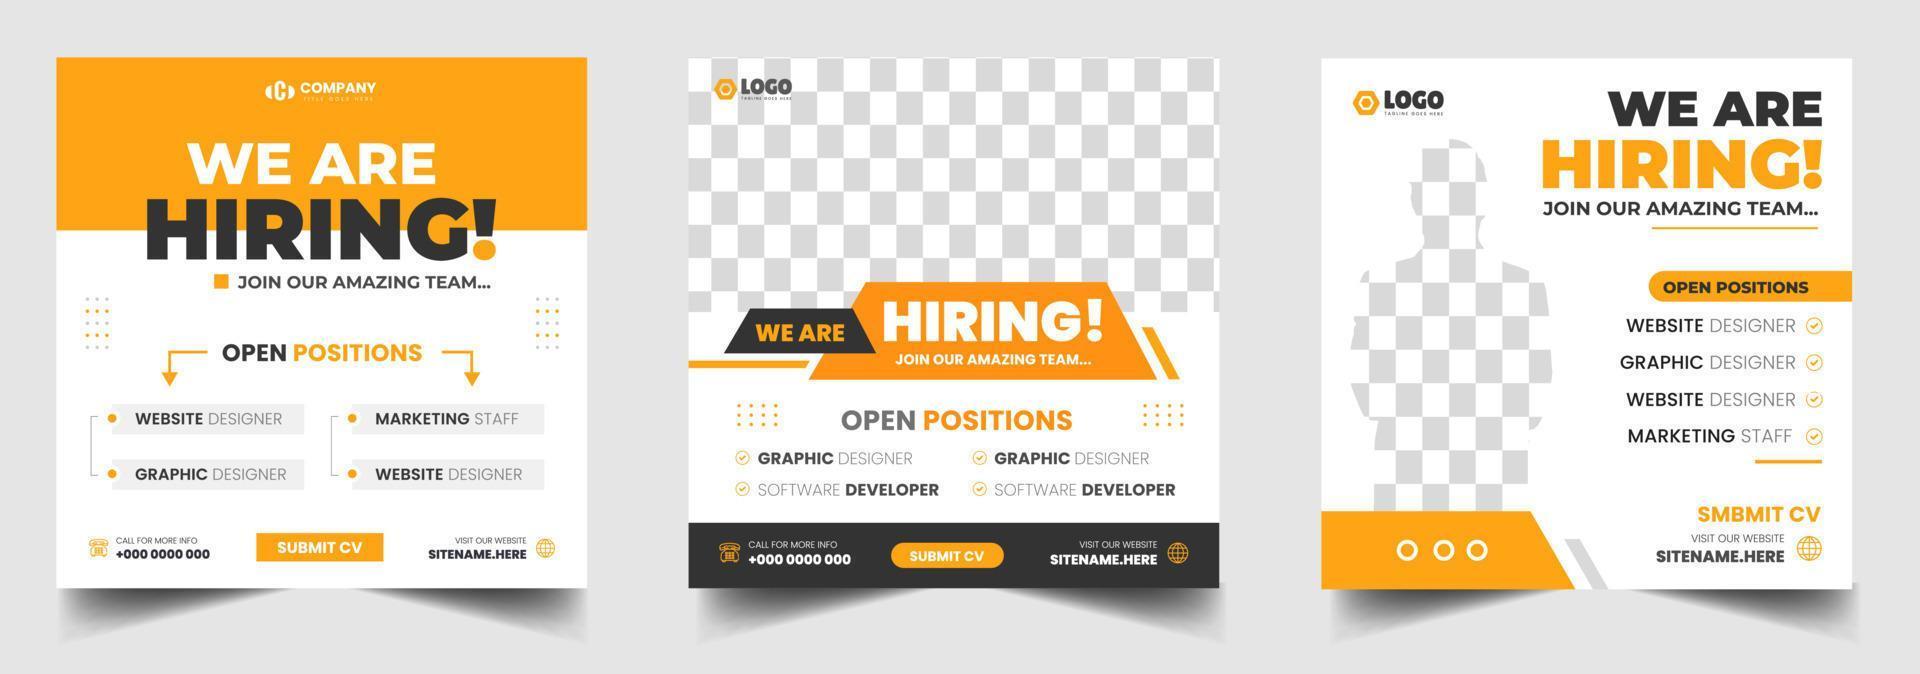 We are hiring job vacancy social media post banner design template with yellow color. We are hiring job vacancy square web banner design. vector